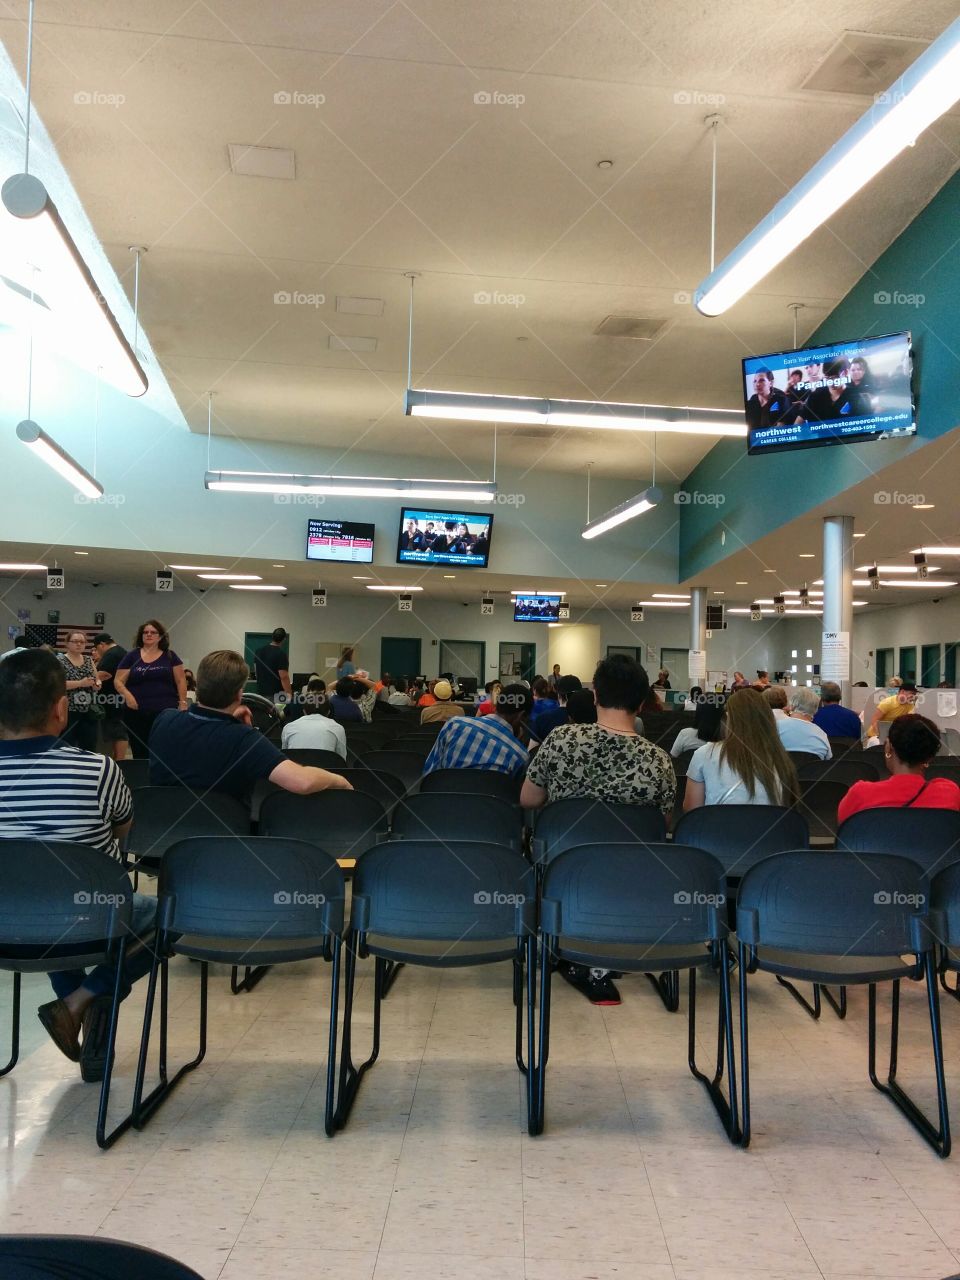 Day at the DMV